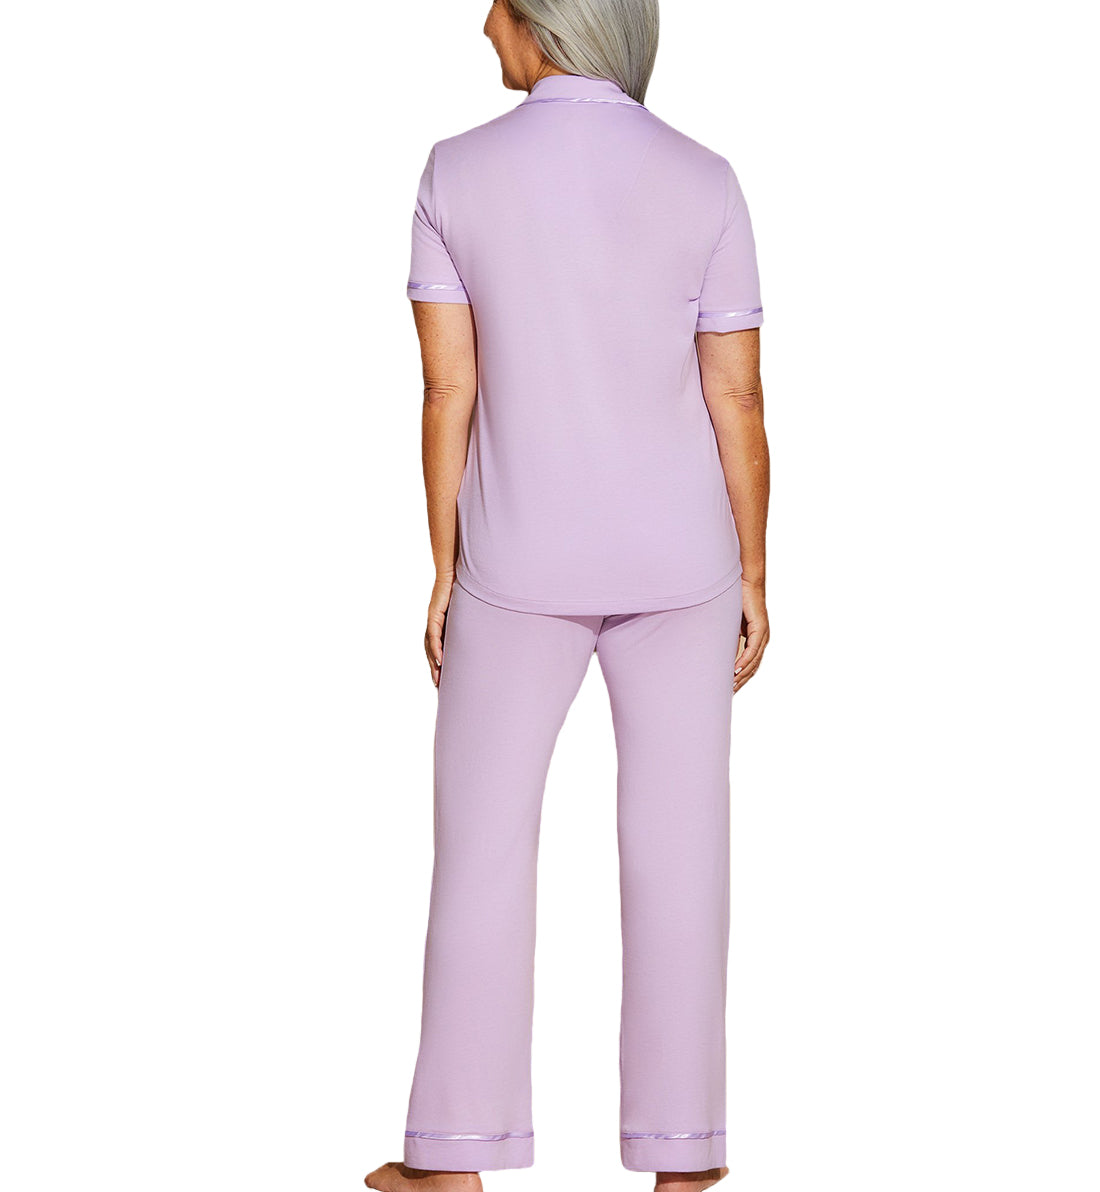 Cosabella Amore Bella Short Sleeve Top & Pant PJ Set (AMORE9645),Small,Icy Violet - Icy Violet,Small